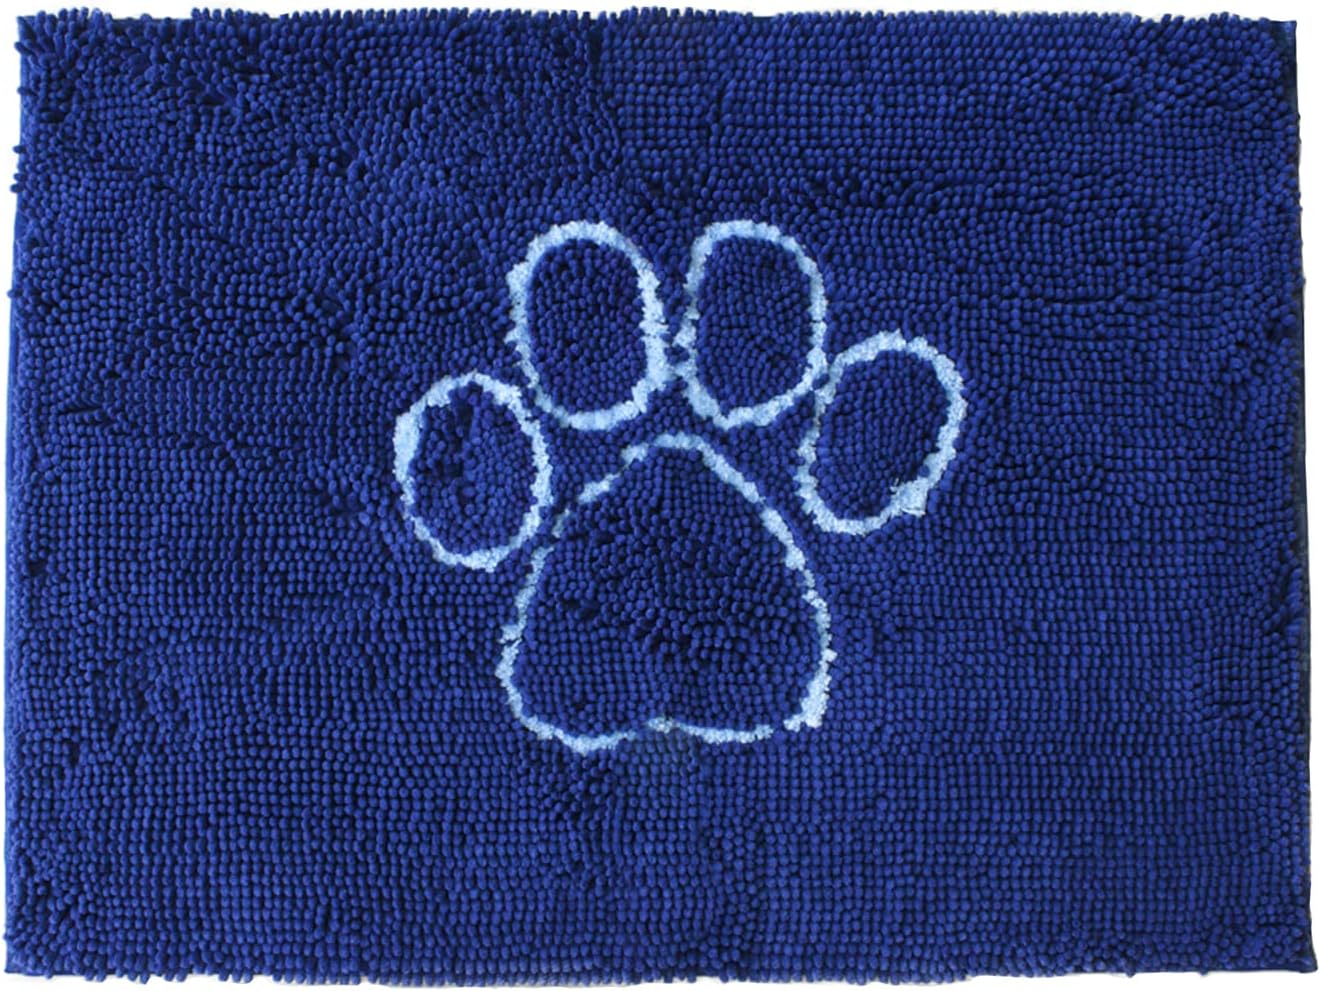 Dog Gone Smart Dirty Dog Microfiber Paw Doormat – Muddy Mats For Dogs – Super Absorbent Dog Mat Keeps Paws & Floors Clean – Machine Washable Pet Door Rugs with Non-Slip Backing | Large Bermuda Blue